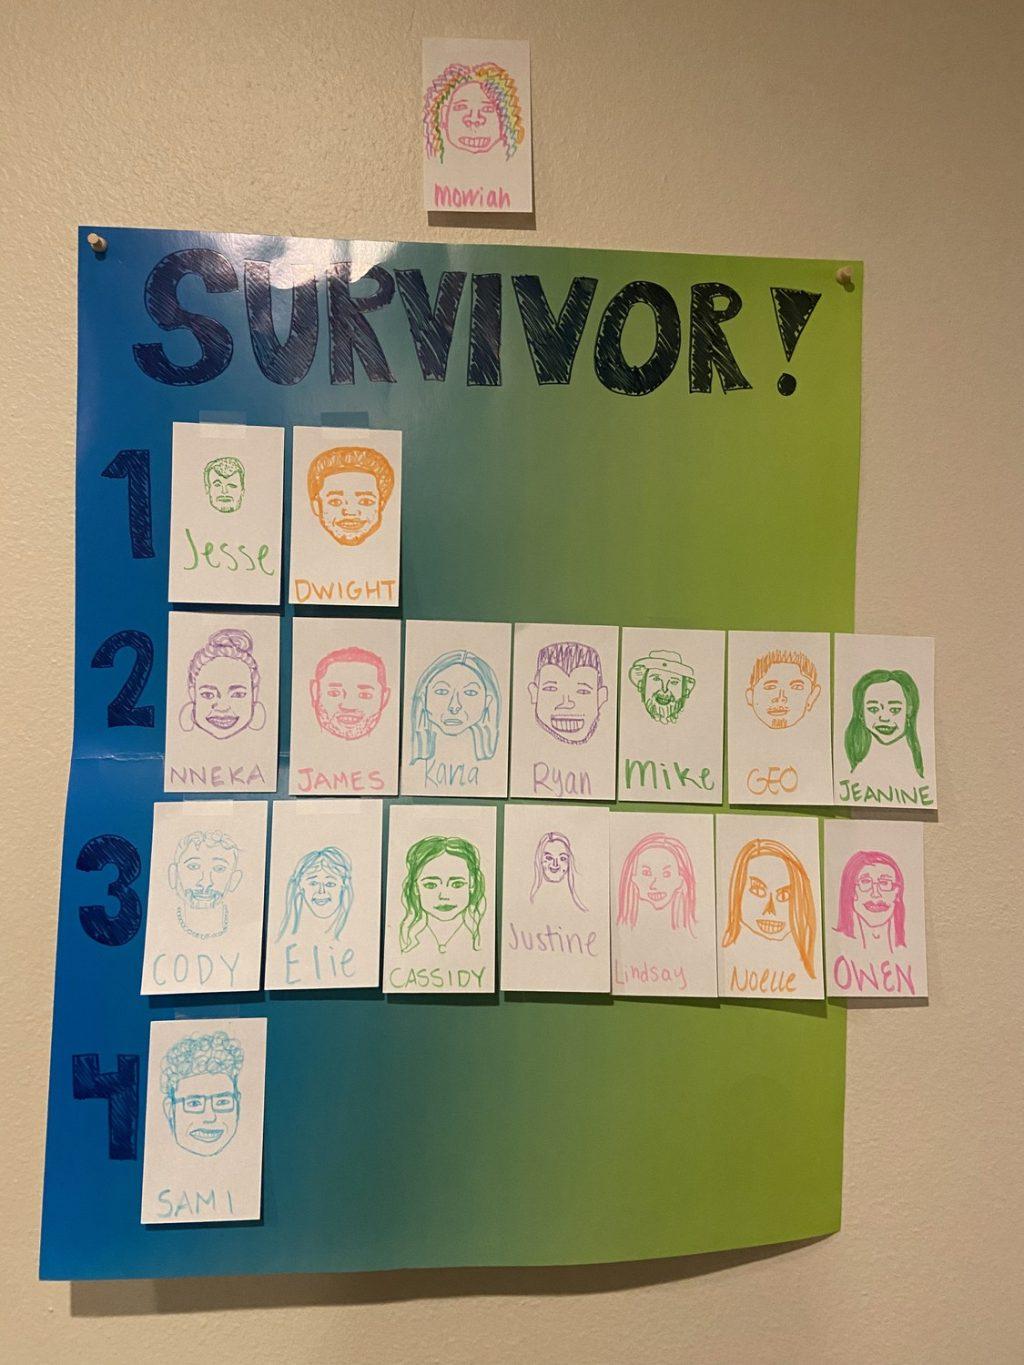 The George Page suite created a reusable tier chart to rank their favorite contestants from the show “Survivor." Bryant said that the suite has watched the survival show every week together since moving in and have consistently updated the chart every week. Photo courtesy of Aubrey Henrie